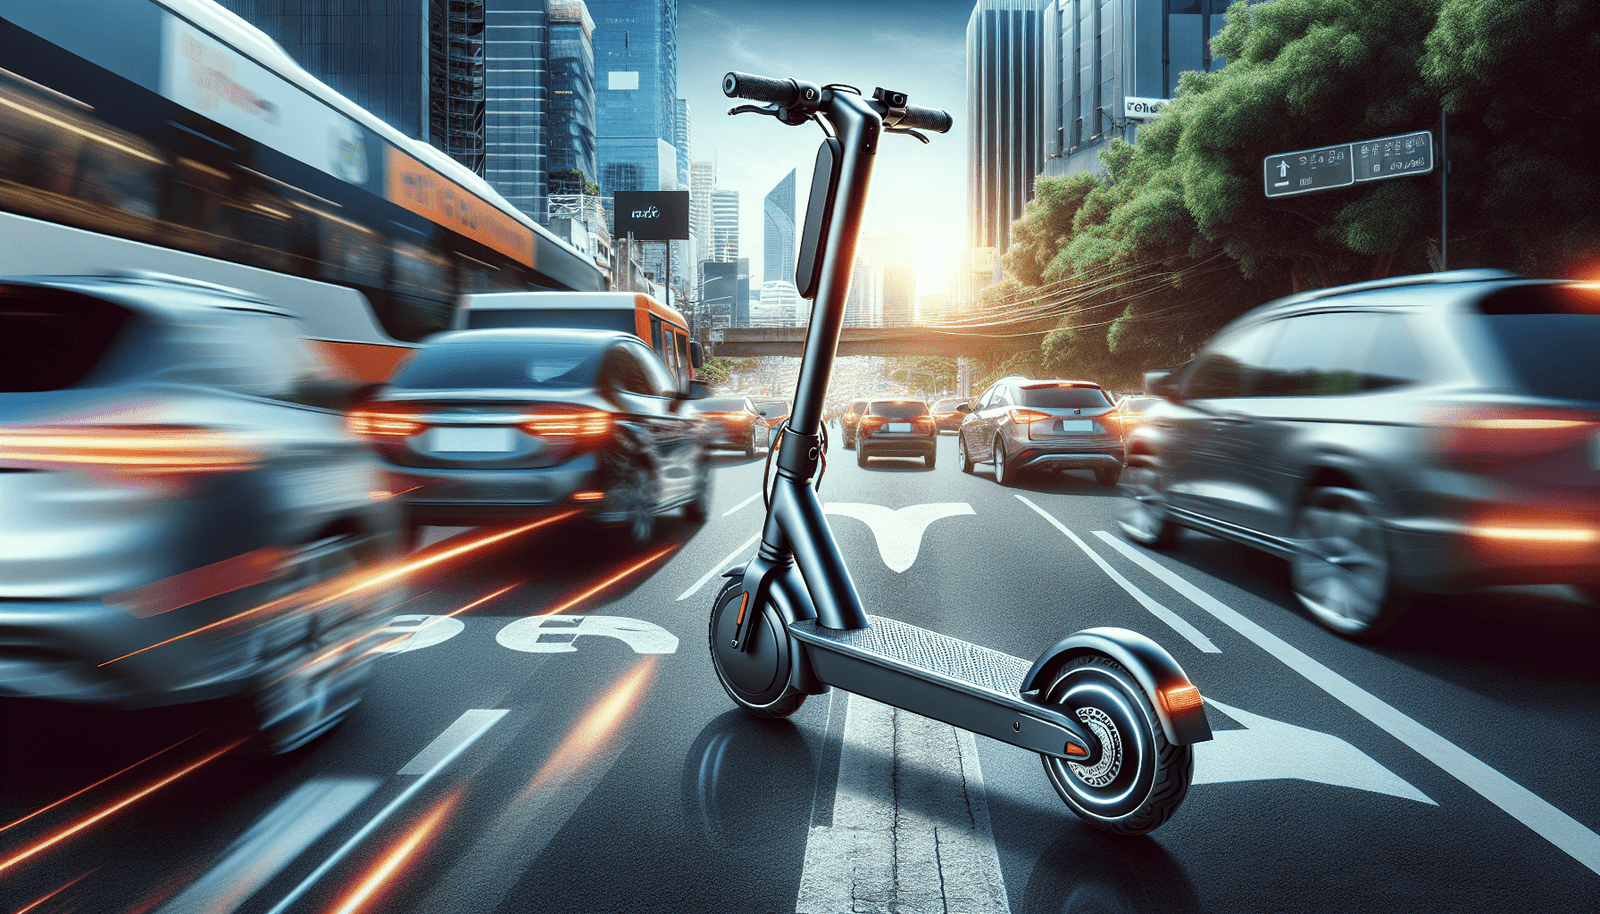 Can I Use My Electric Scooter For Rideshare Services Like Uber Or Lyft?